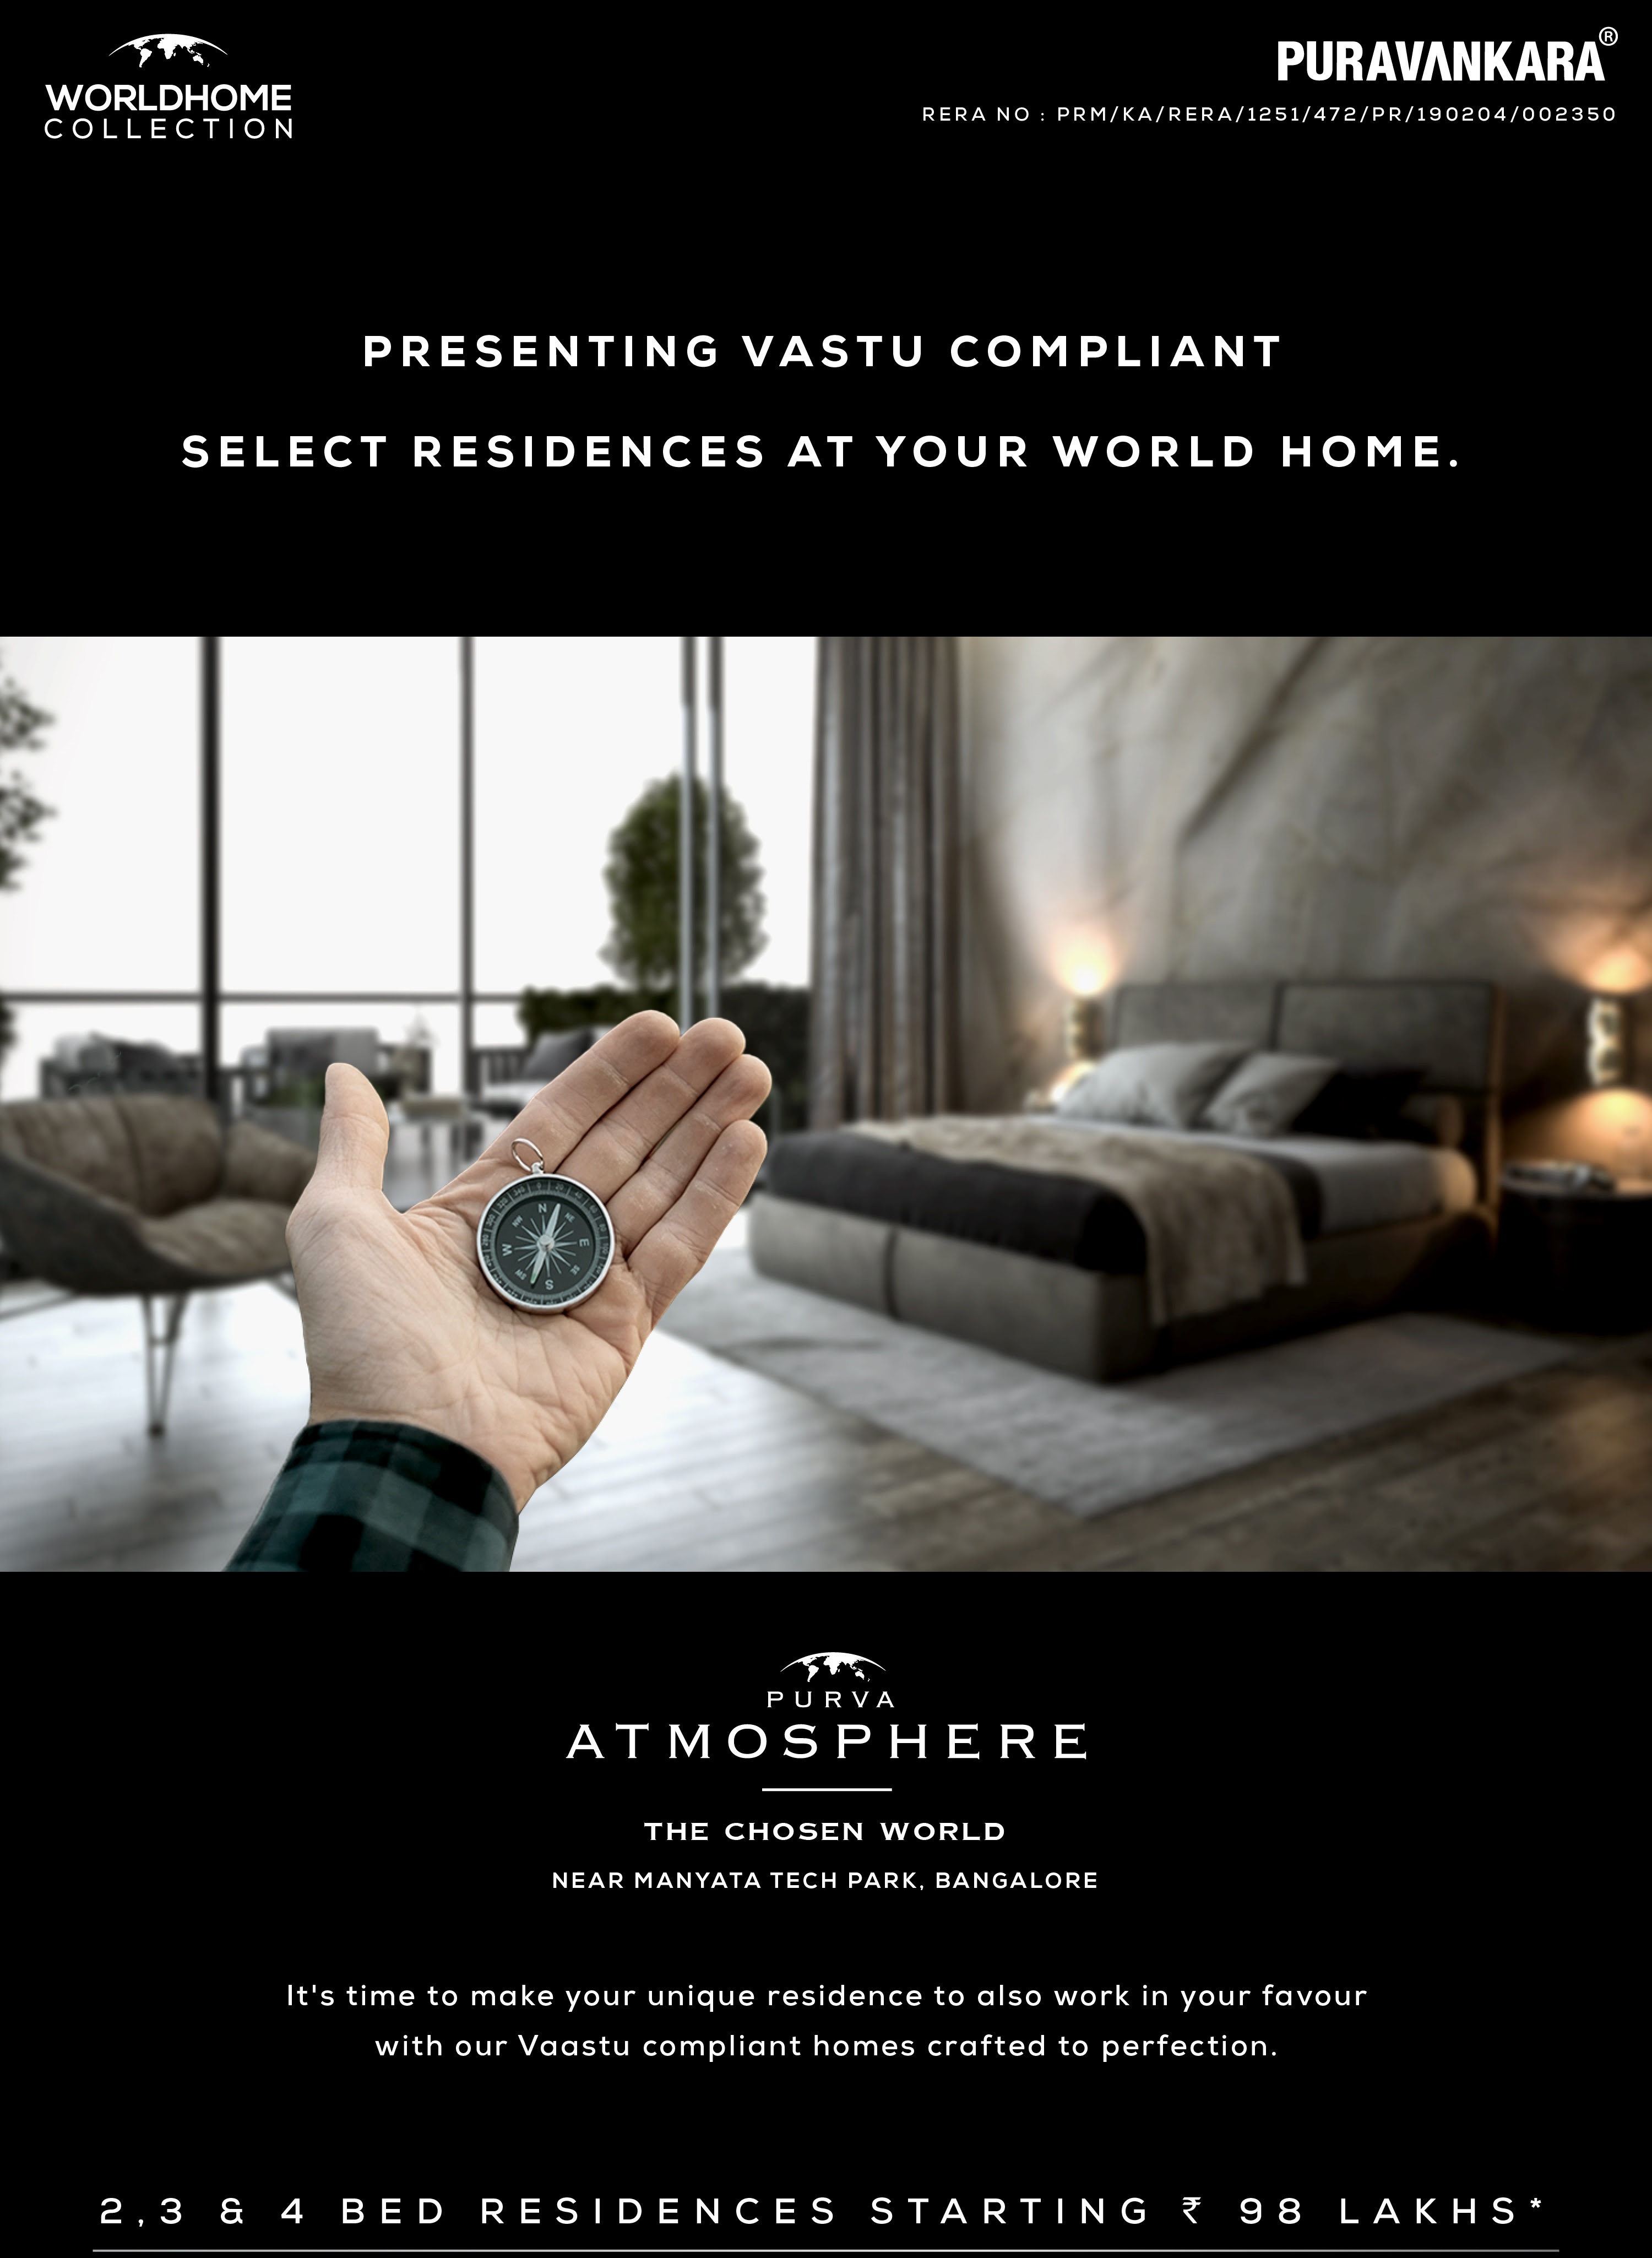 Presenting vastu compliant, select residences at your world home at Purva Atmosphere in Bangalore Update